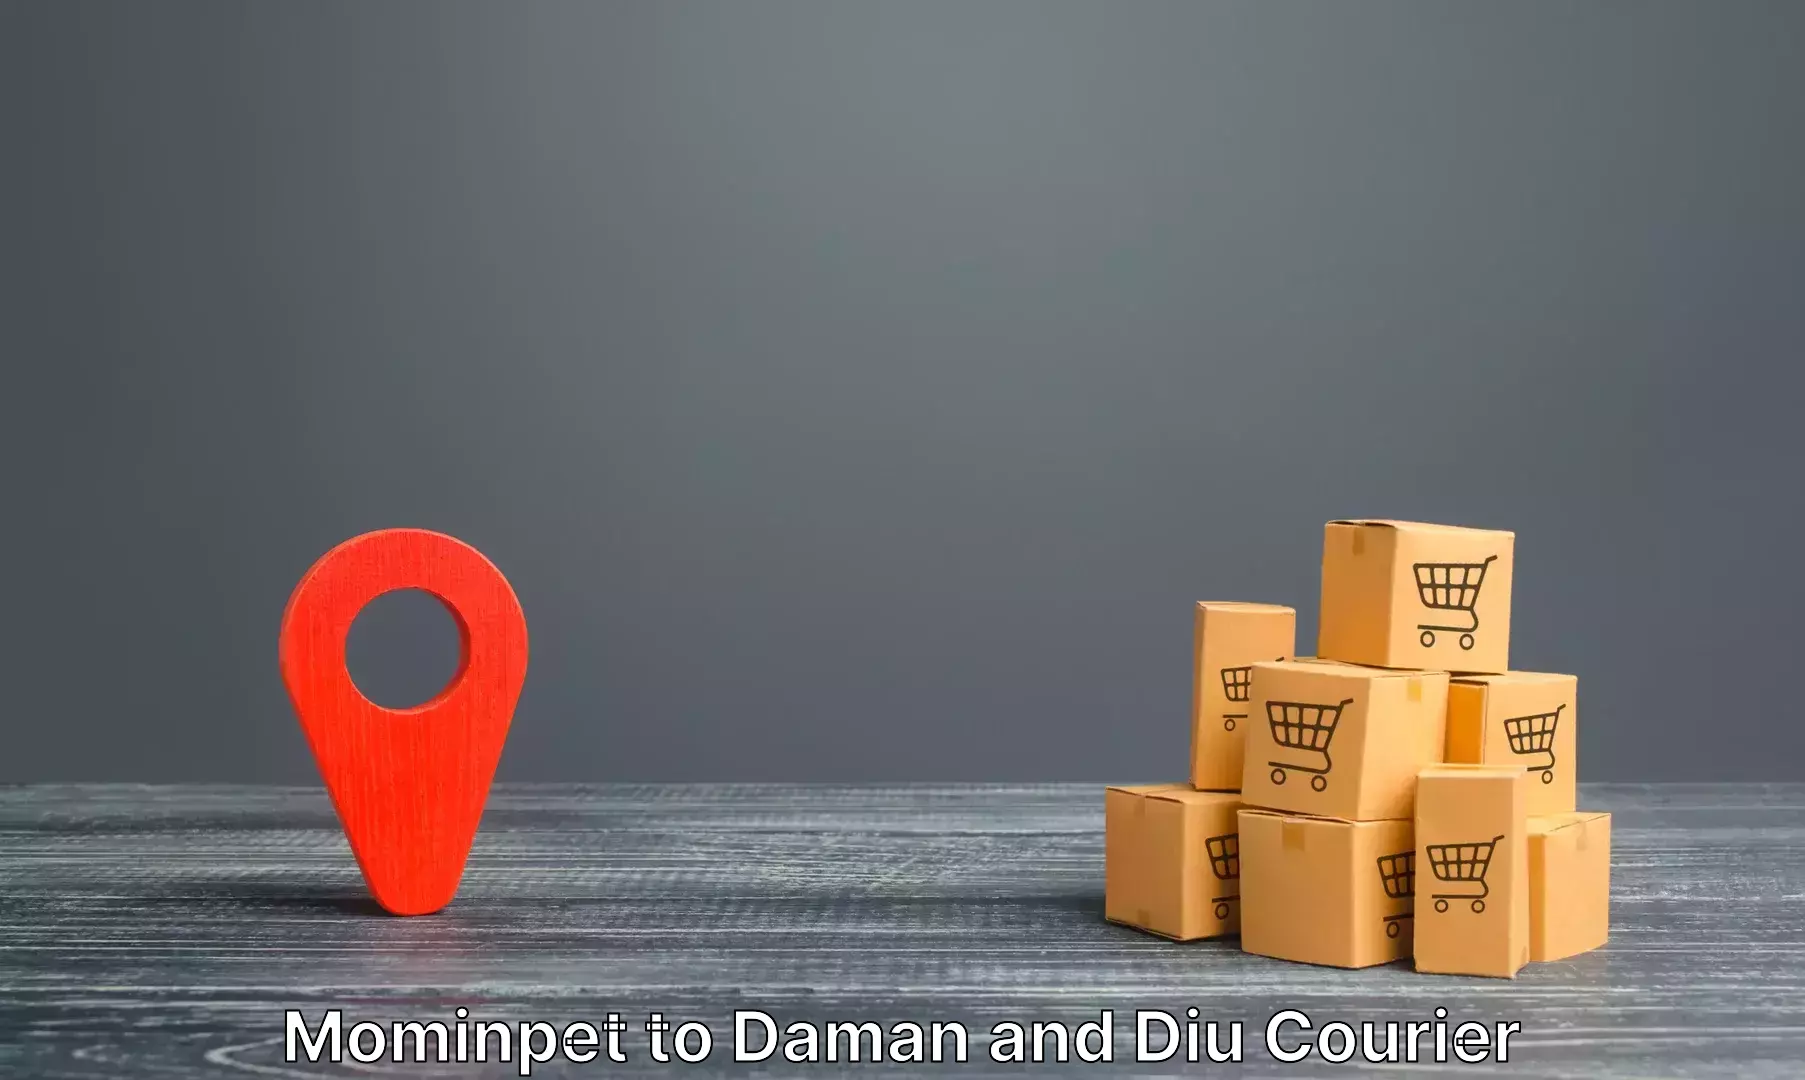 Luggage transfer service Mominpet to Daman and Diu